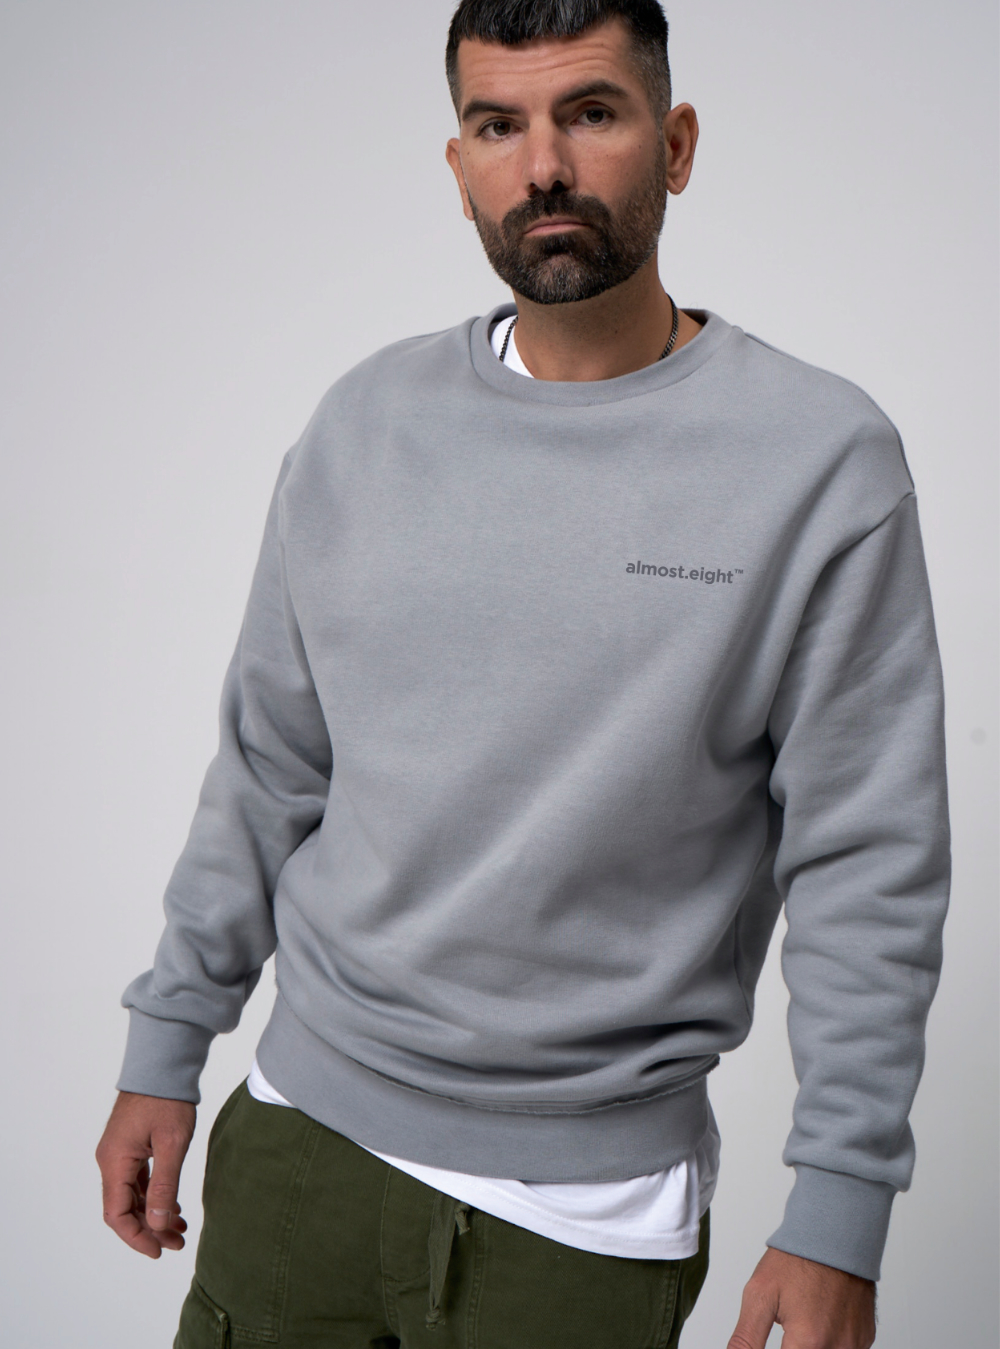 almosteight-sweater-epic-grey-small-clean-lettering-grey-01.jpg